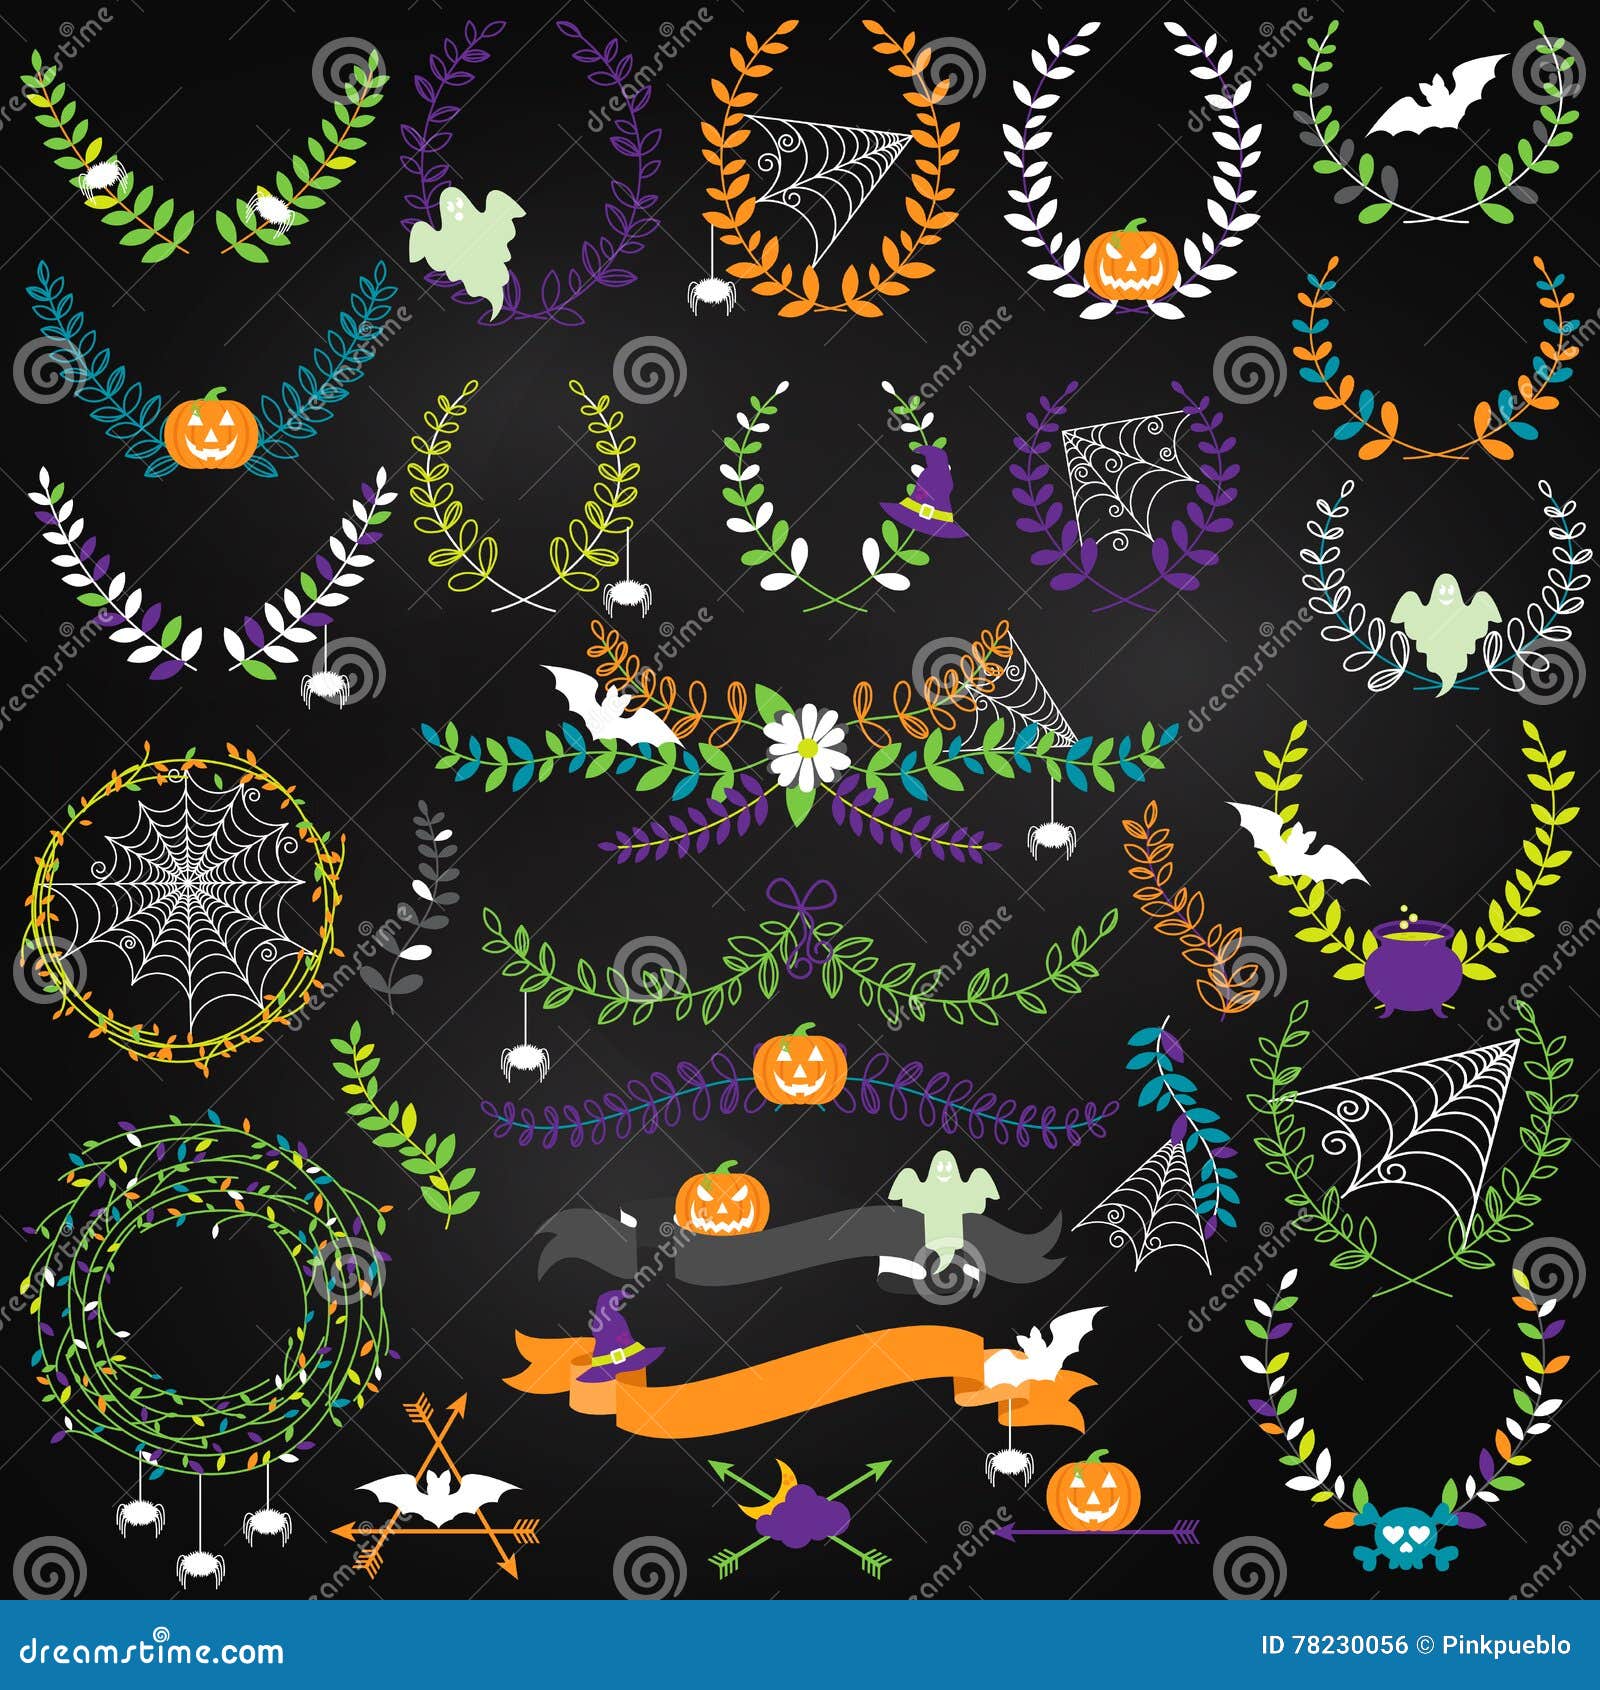  collection of halloween florals, laurels and wreaths